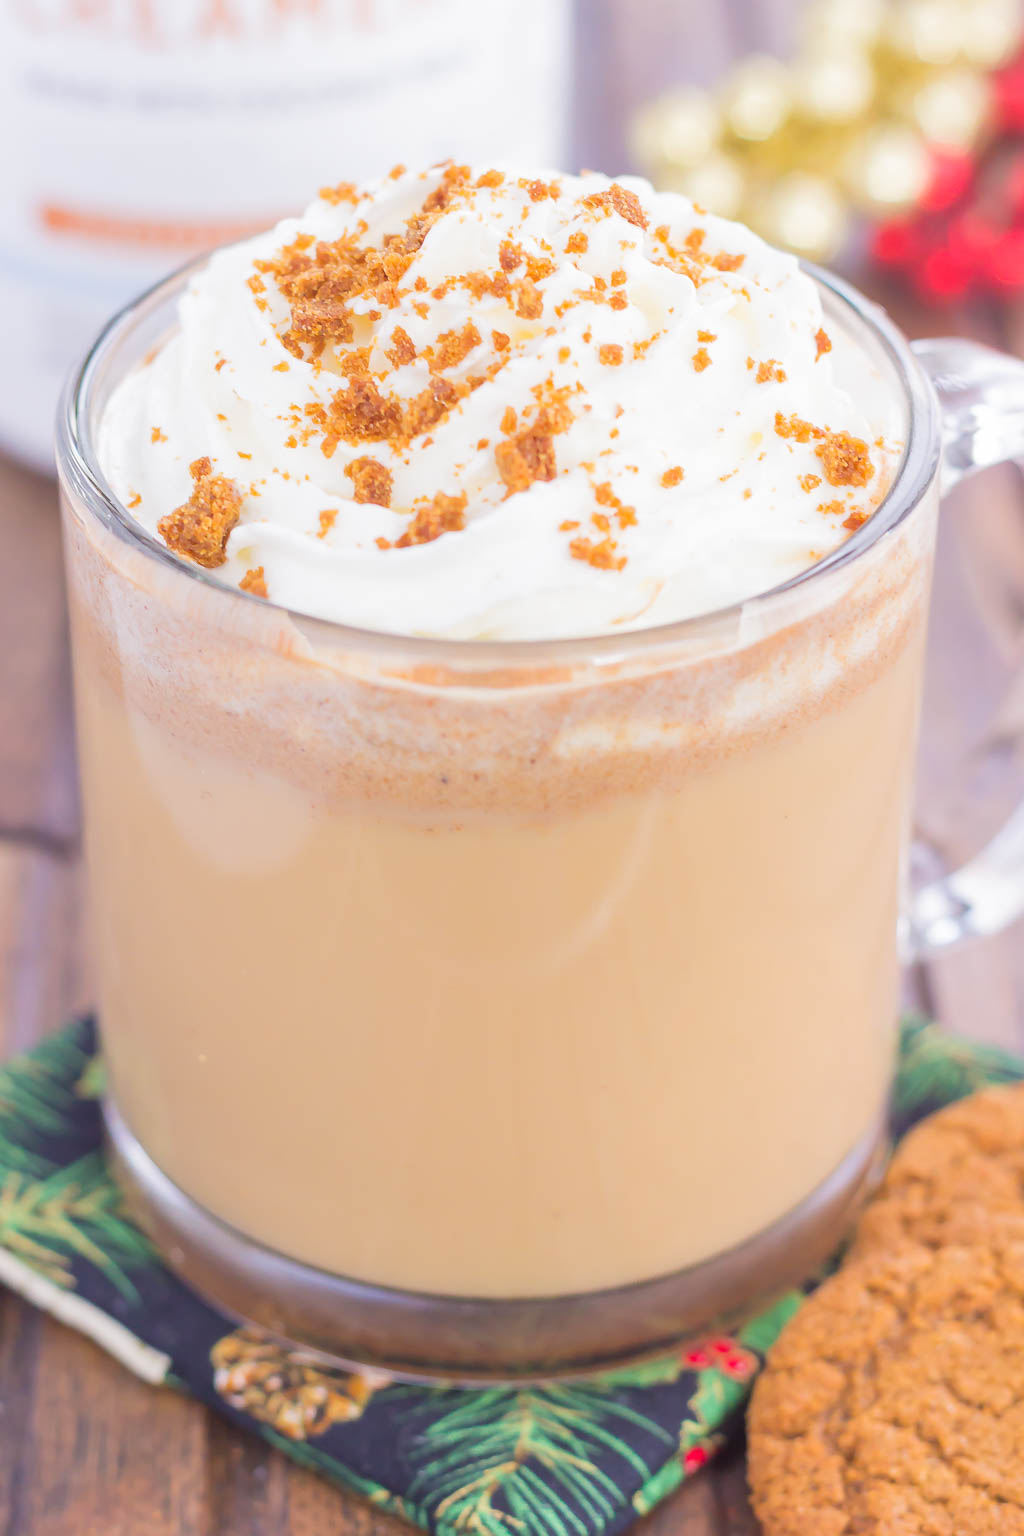 Skip the coffee shop and make your own Spiced Gingerbread Latte to celebrate the the holidays. Filled with cozy spices, lots of flavor, and ready in less than 10 minutes, you can enjoy this warm and festive drink all season long! #gingerbread #gingerbreadlatte #gingerbreadcoffee #gingerbreadbrecipe #christmasdrink #holidaybeverage #drink #coffee #latte